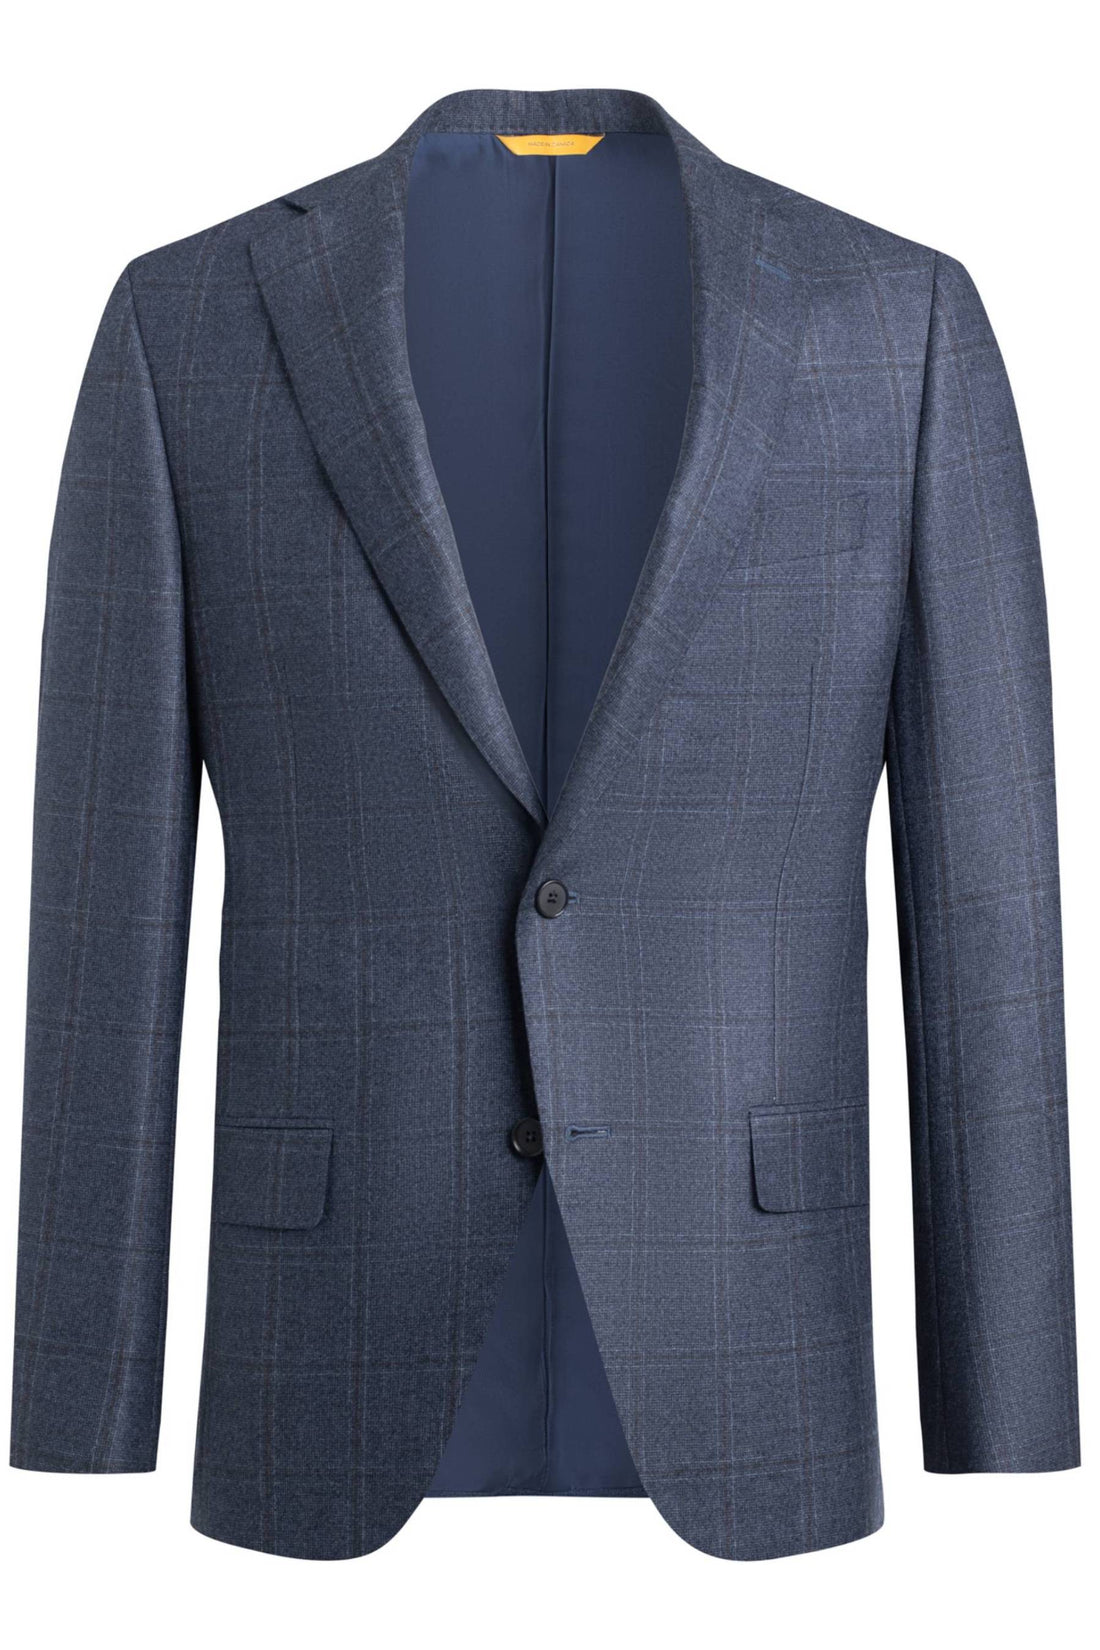 Heritage Gold Dark Blue 120'S WP Neat Suit Front Jacket